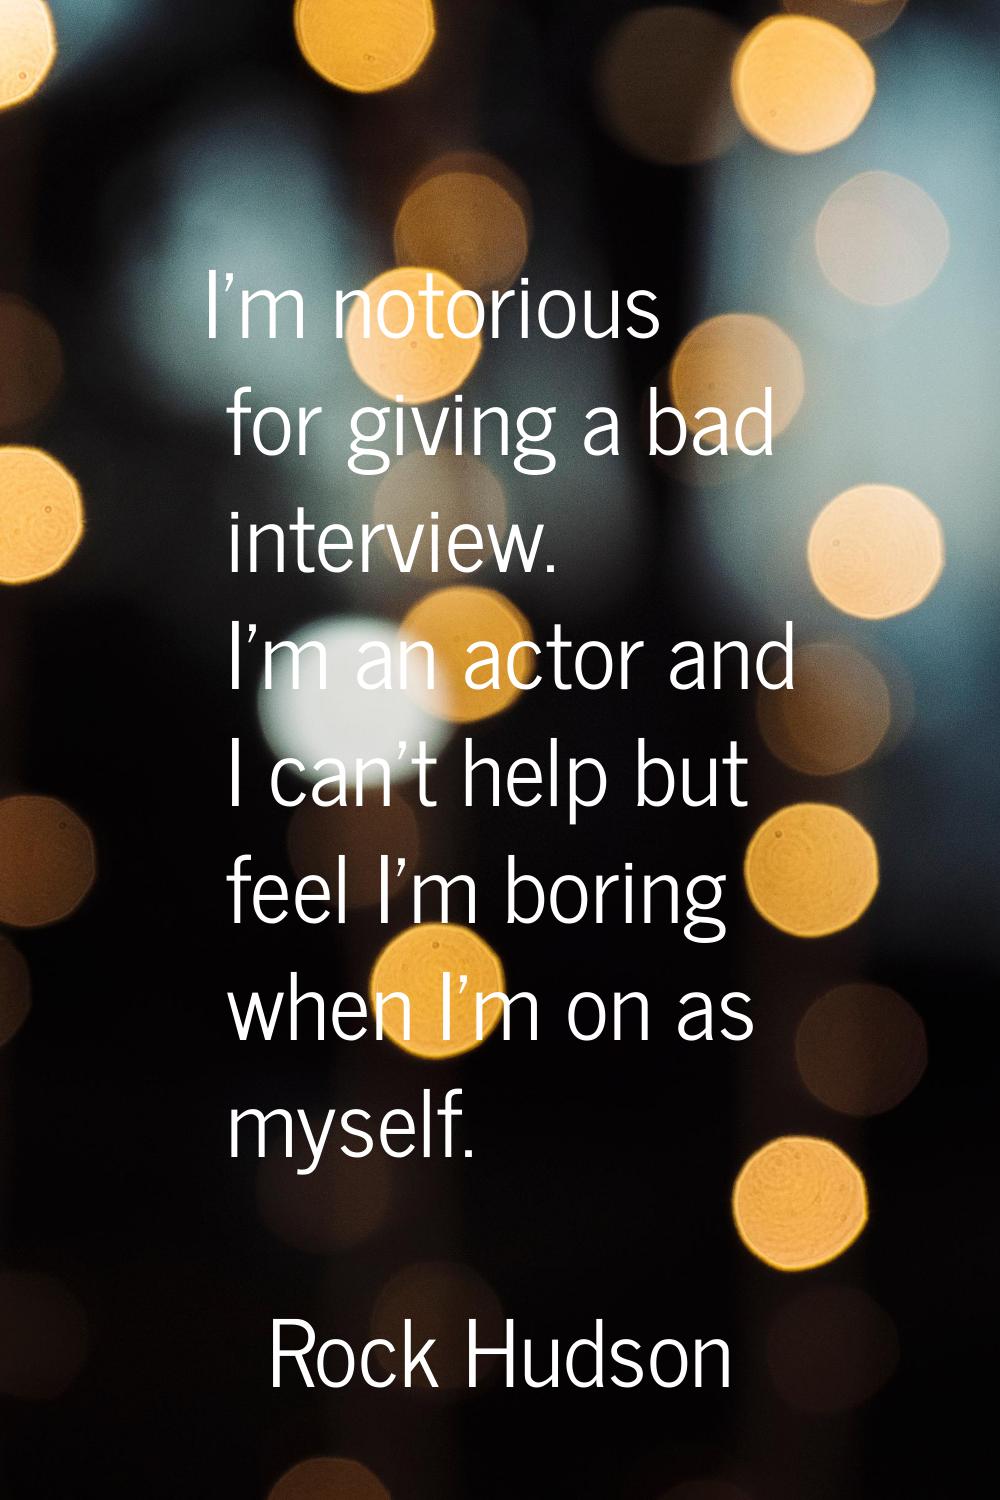 I'm notorious for giving a bad interview. I'm an actor and I can't help but feel I'm boring when I'